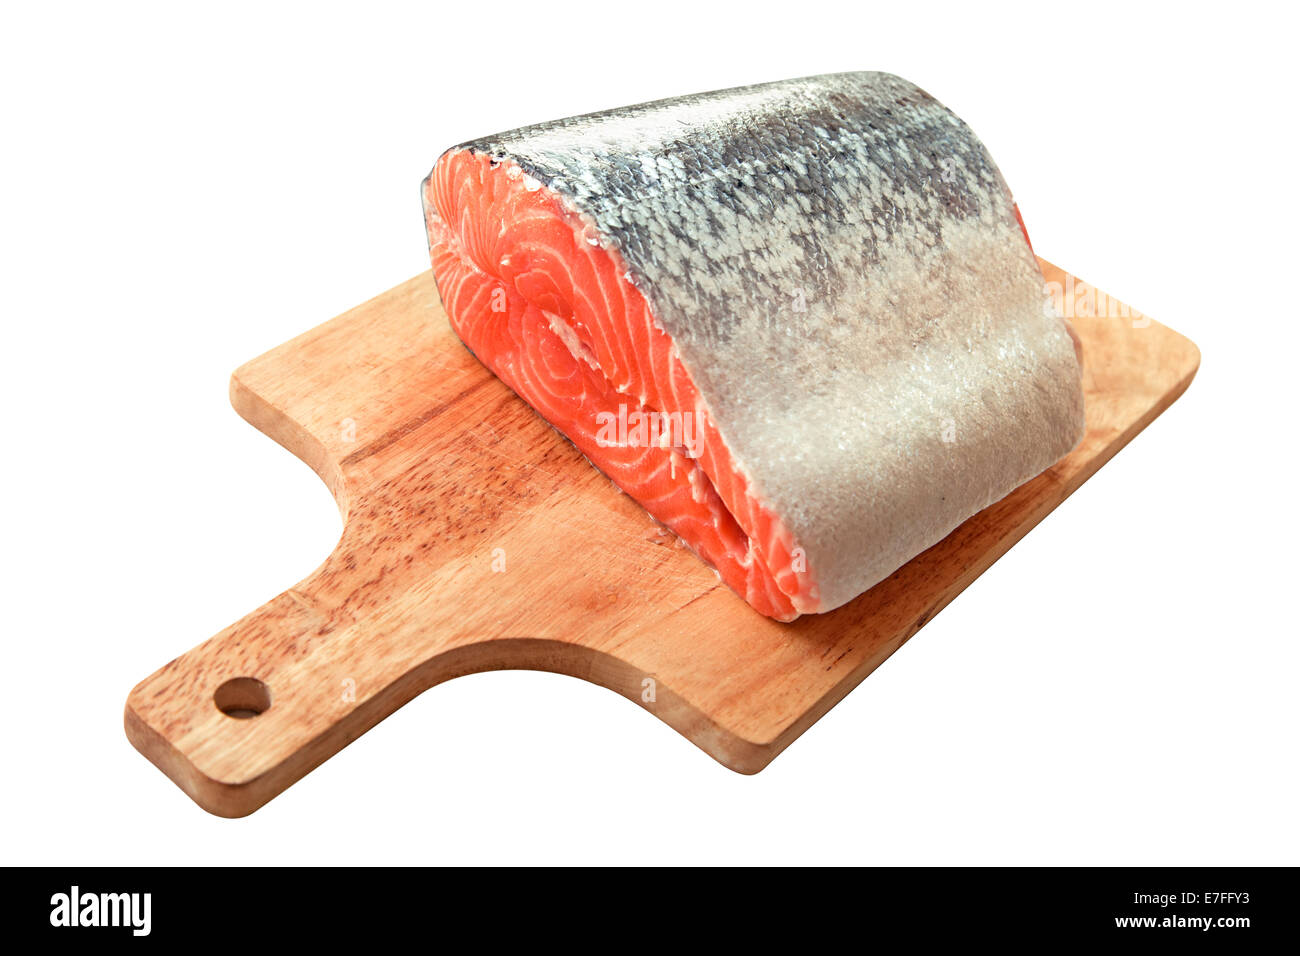 Salmon on a cutting board isolated over white background Stock Photo